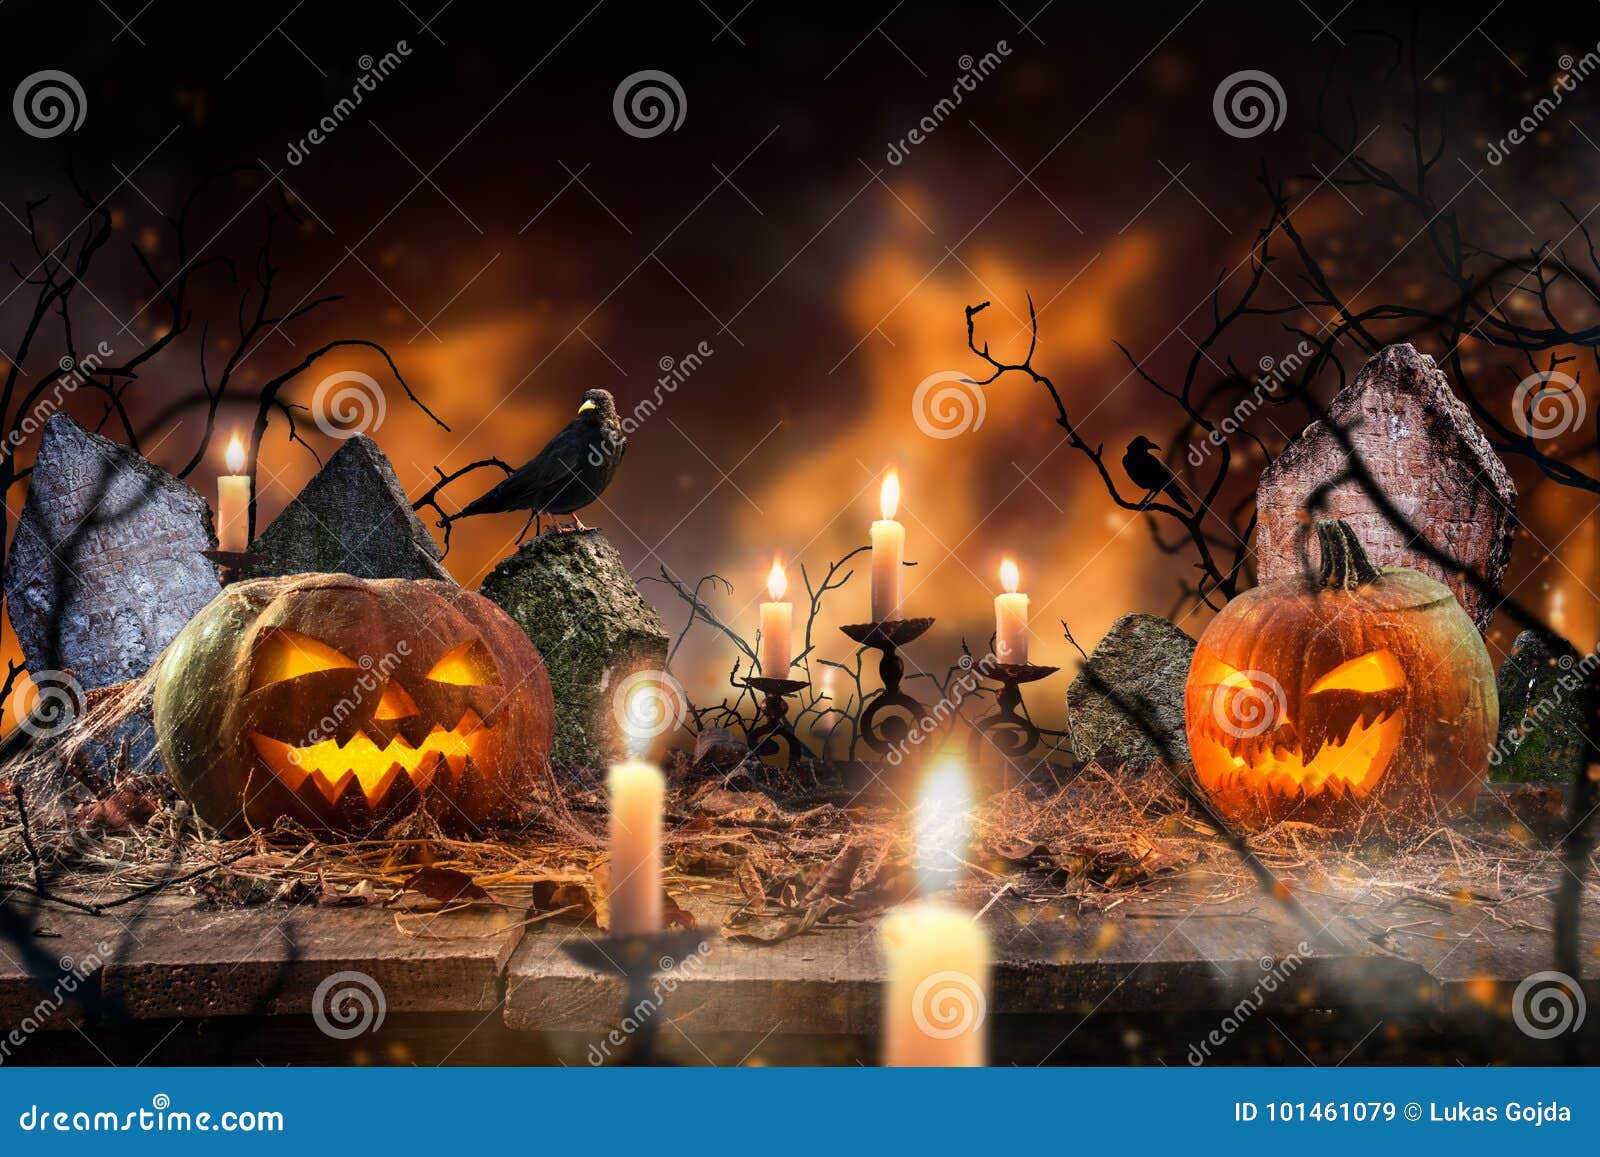 Spooky Halloween Background Stock Image - Image of concept, background ...